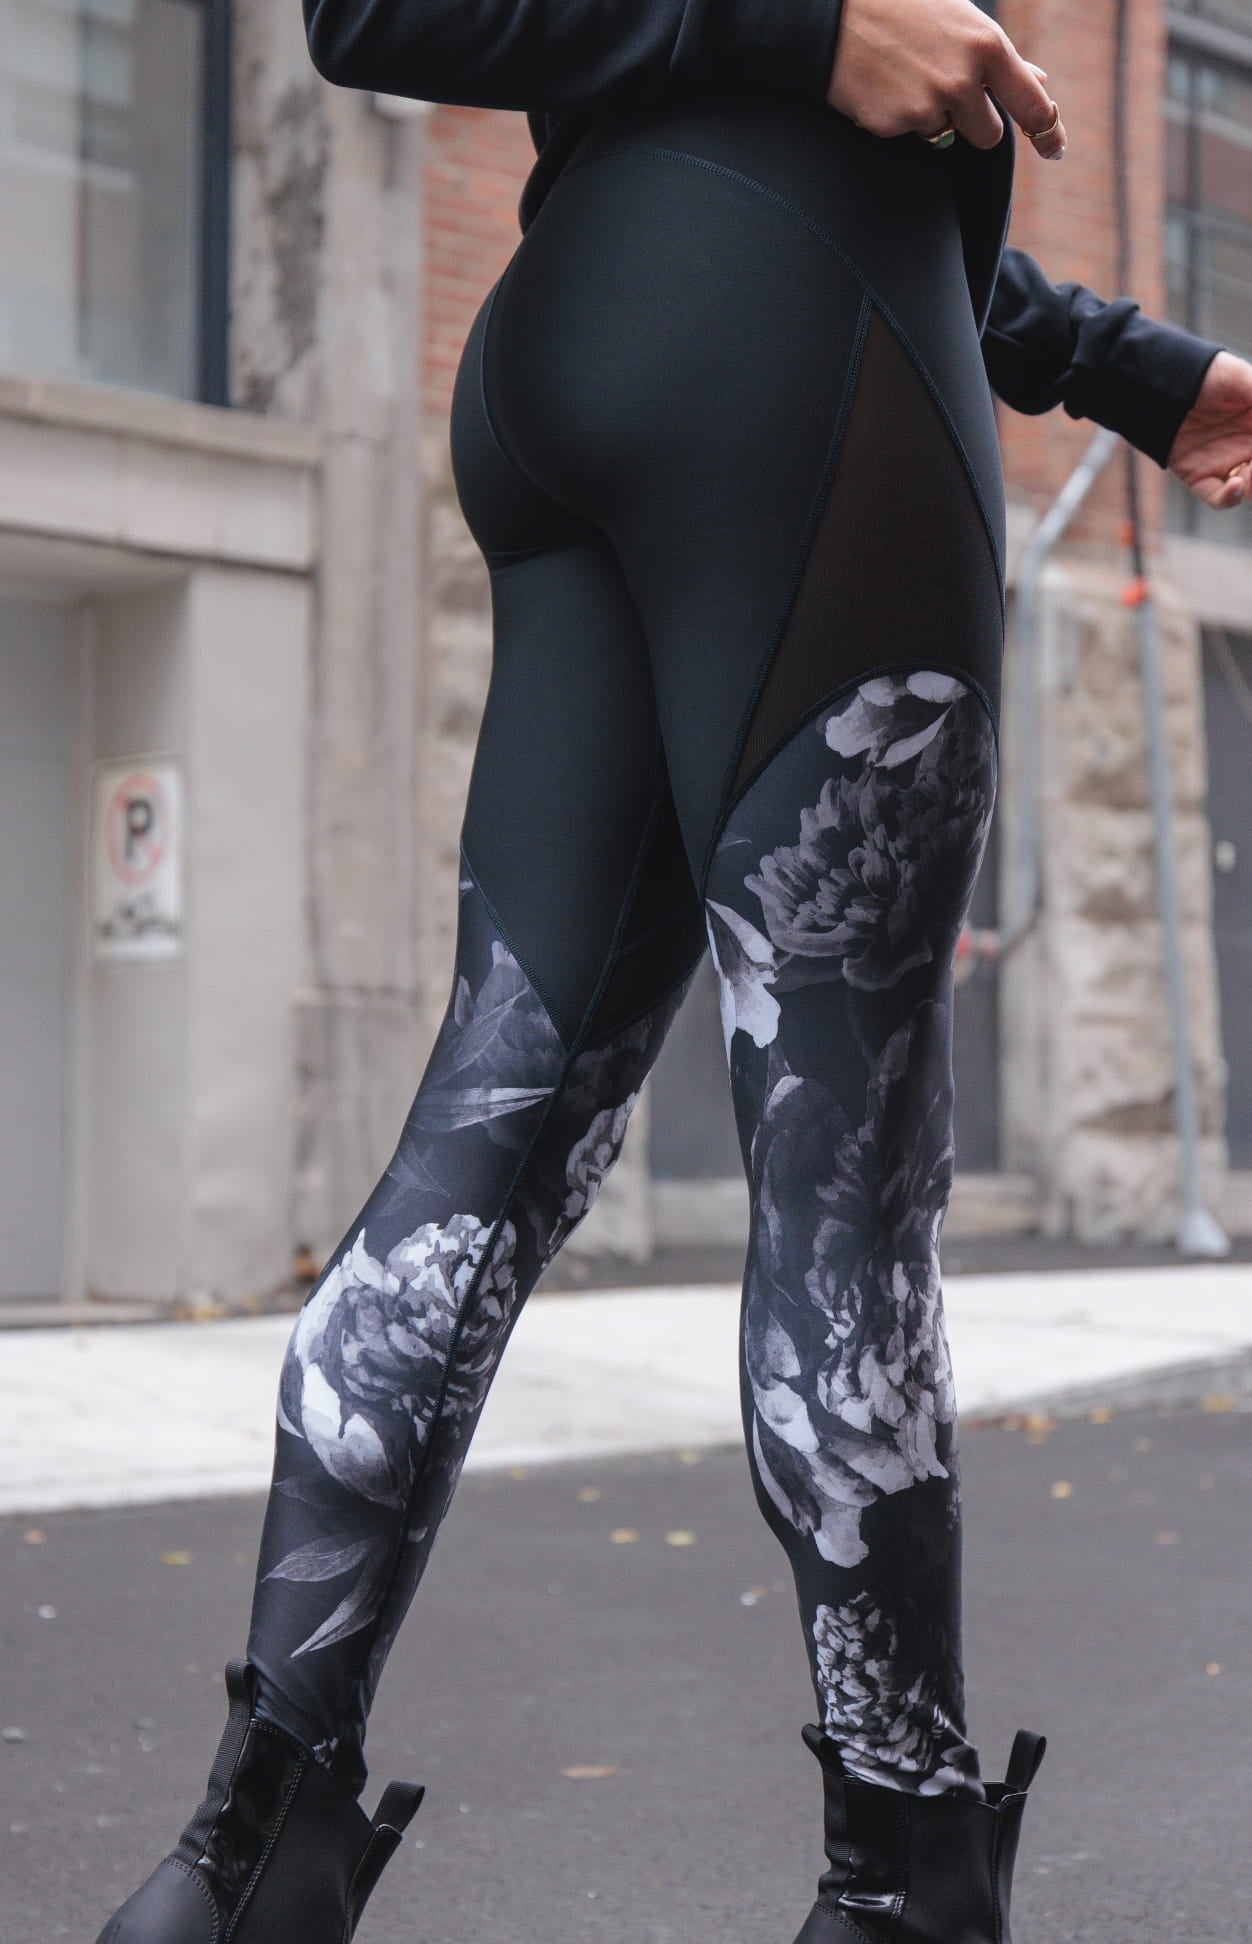 Ecomove and Mesh Exhale Ultra High-Rise Legging